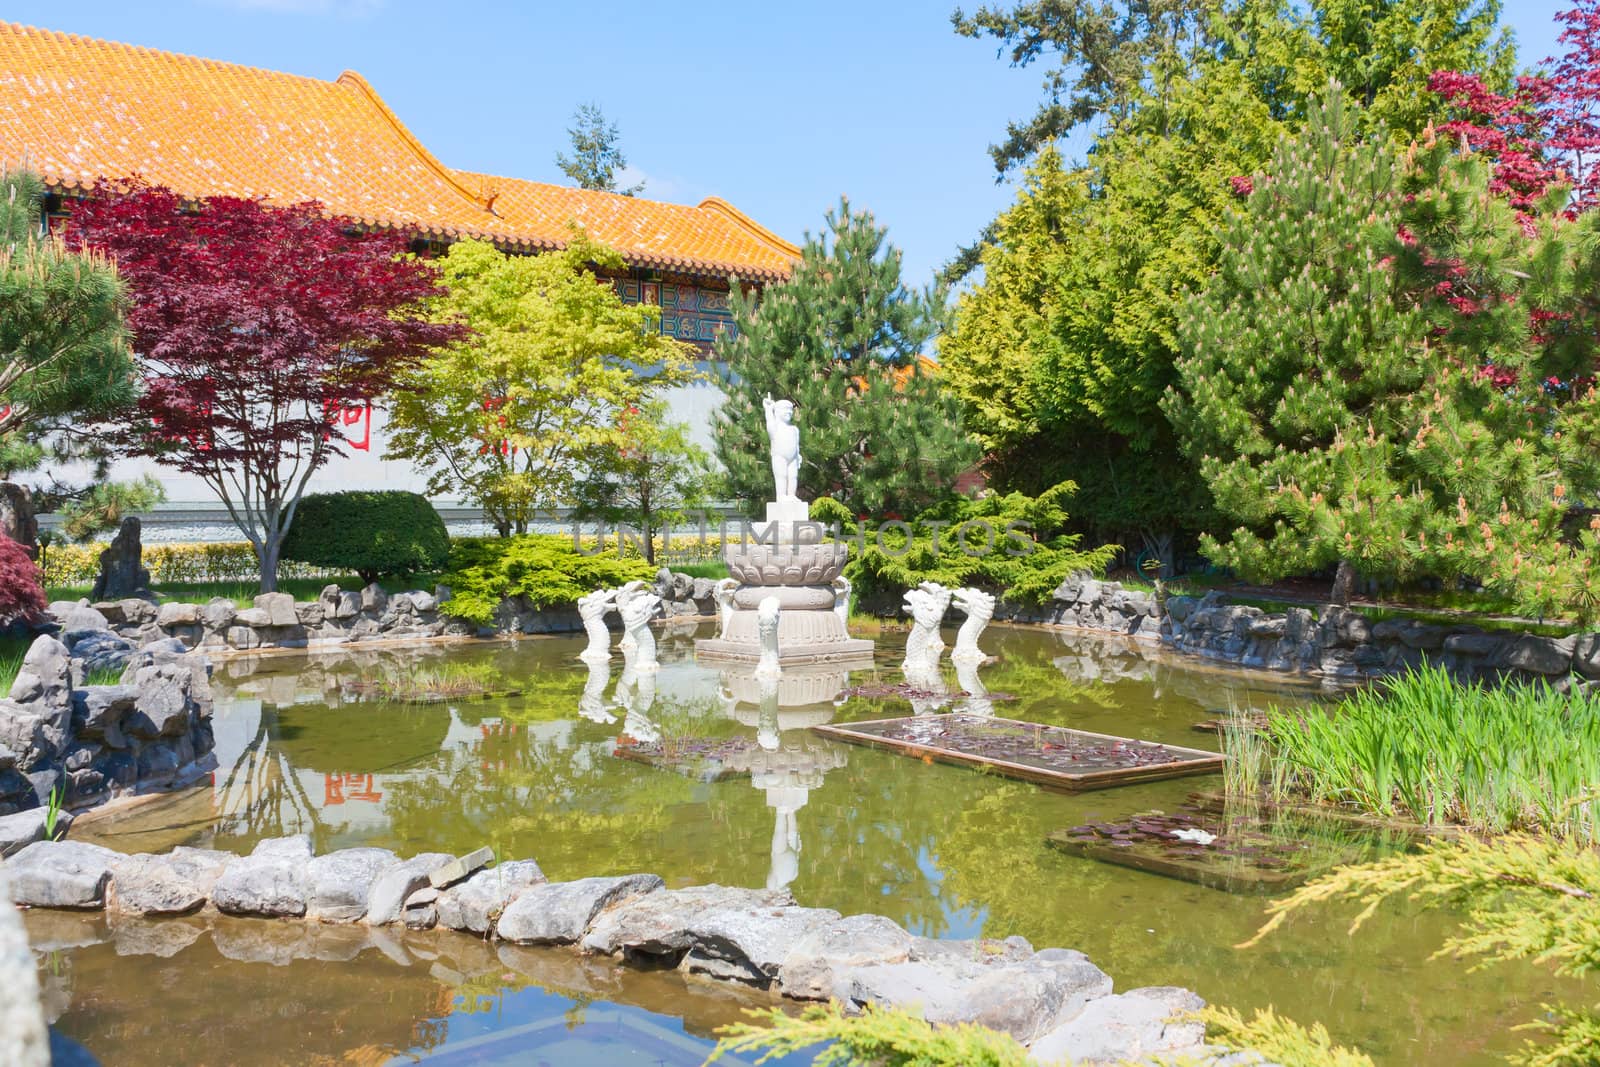 Pool and fountain in a Buddhist garden.